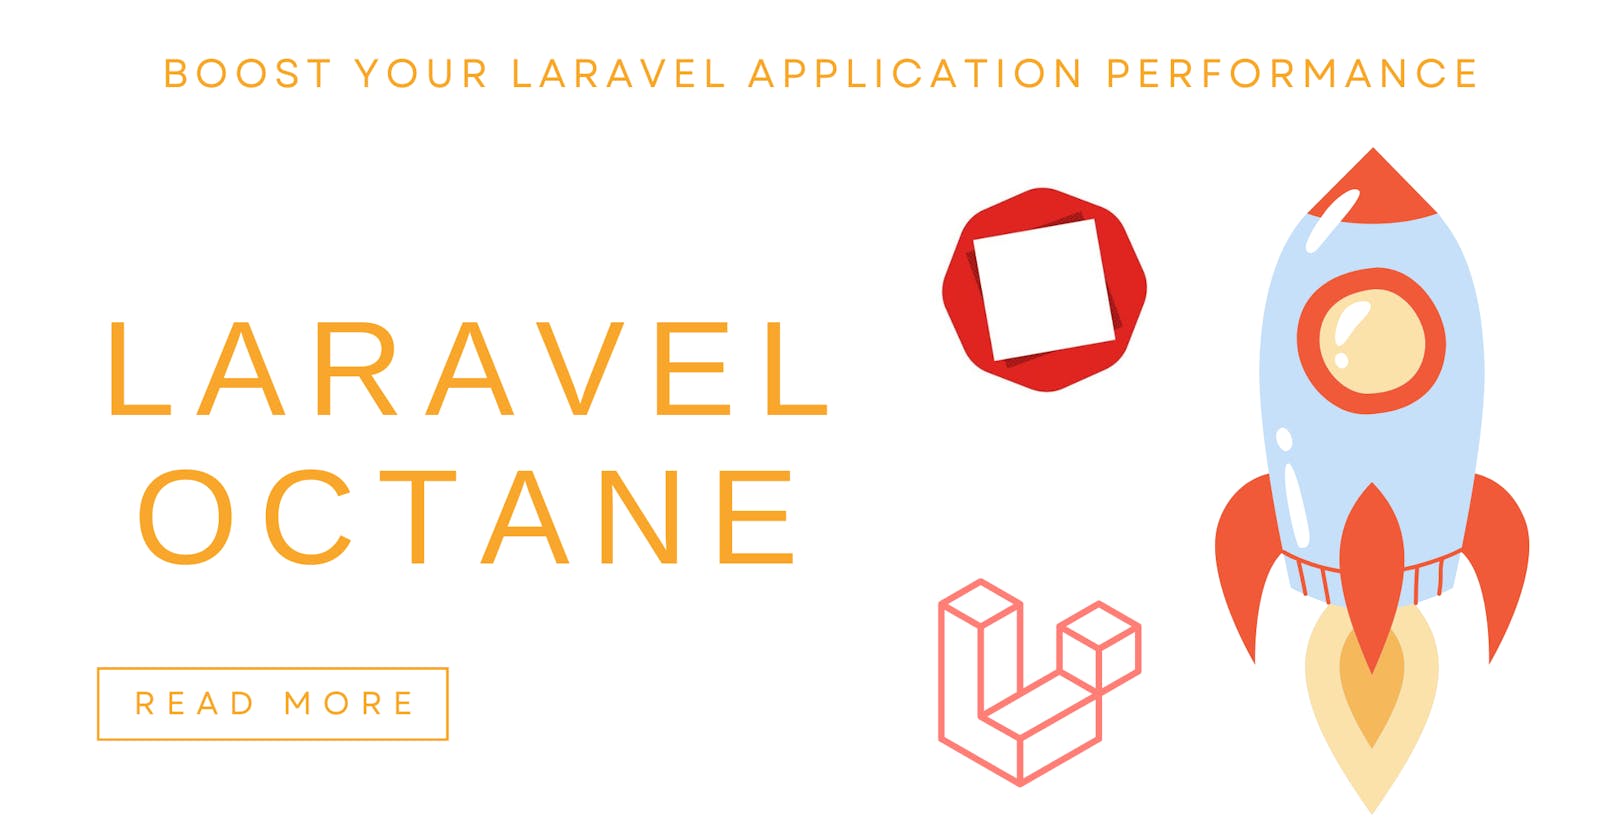 Boost Your Laravel Application Performance with Octane: Benefits and Features Explained